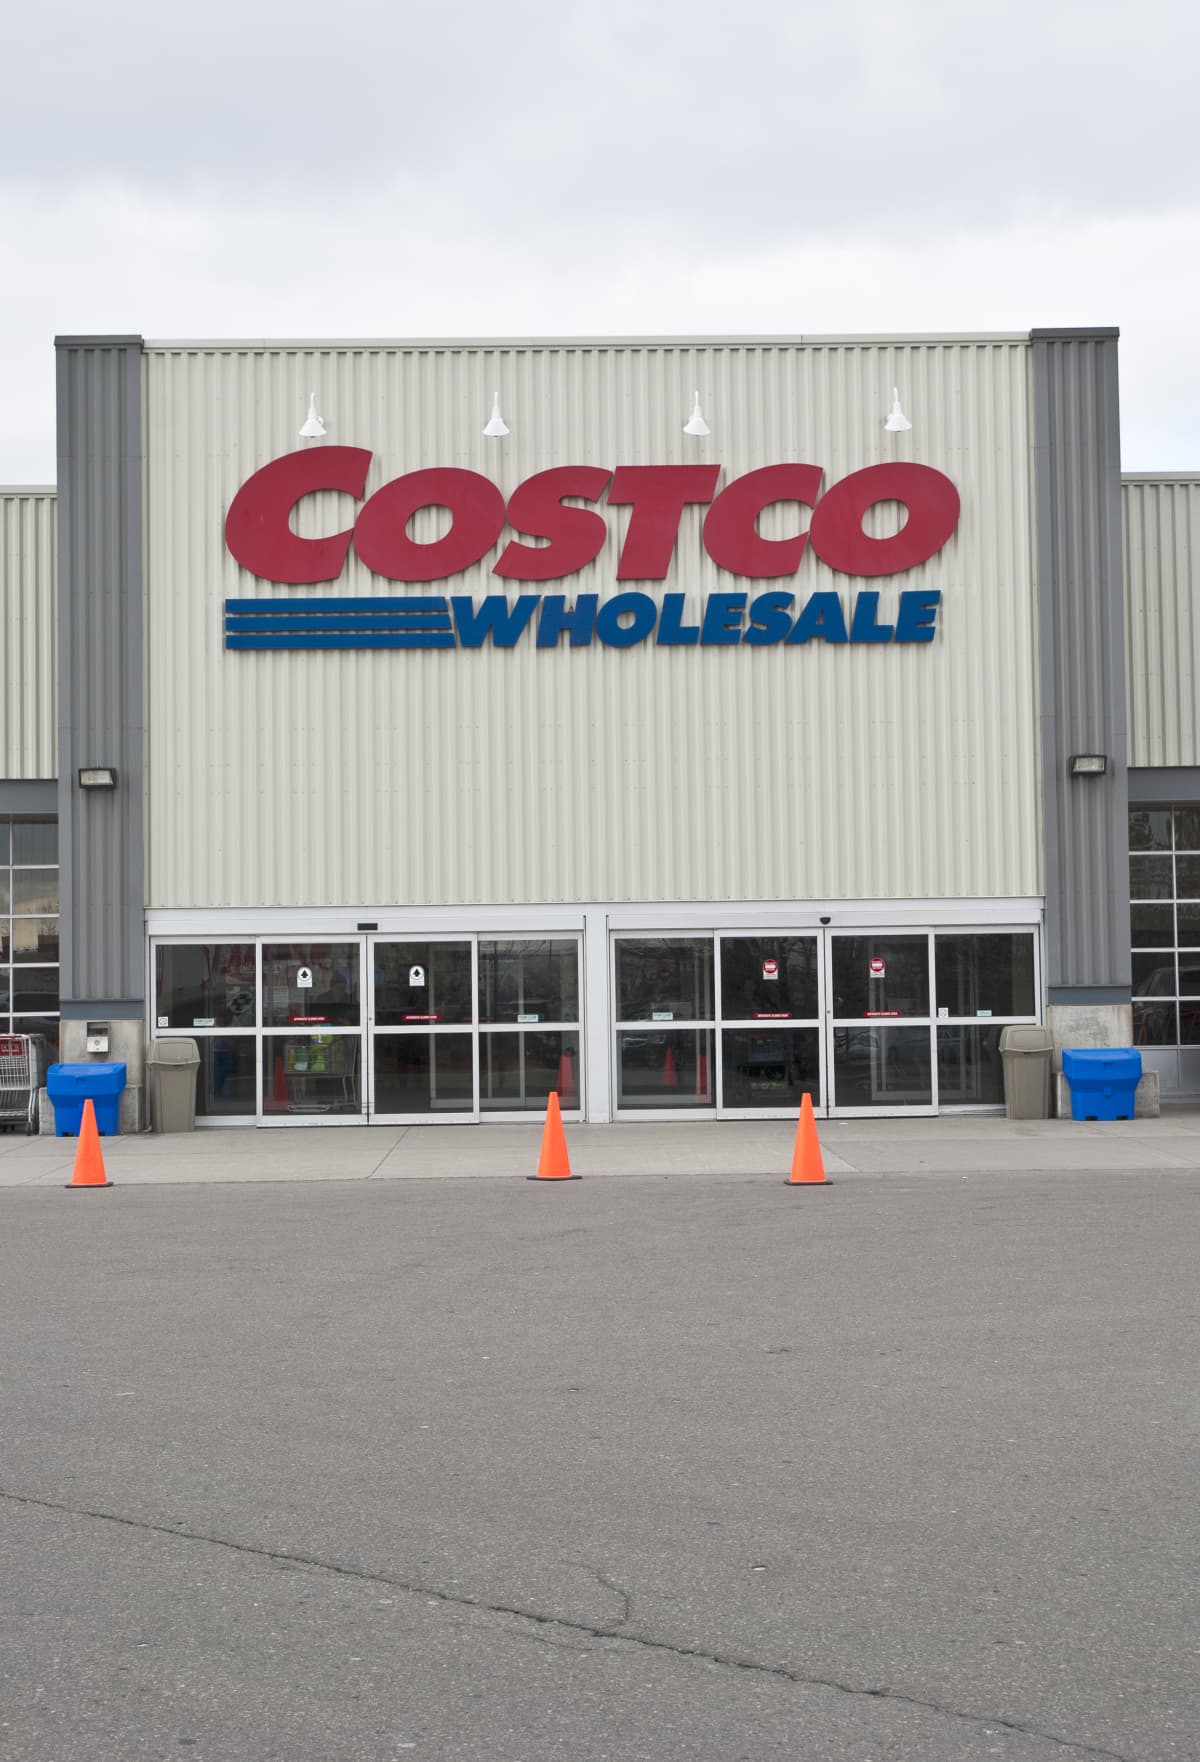 MELBOURNE, AUSTRALIA - AUGUST 04: A general view of Costco signage in Docklands on August 04, 2020 in Melbourne, Australia.  Retail stores across Melbourne will close to customers as further stage 4 lockdown restrictions are implemented in response to Victoria's ongoing COVID-19 outbreak. The new rules, which come into effect at 11:59 on Wednesday 5 August, will see the majority of retail businesses like clothing, furniture, electrical and department stores will be closed to the public for the duration of the stage 4 restrictions. Businesses will be able to operate click and collect services with social distancing and contactless payments. Supermarkets, grocery stores, bottle shops, pharmacies, petrol stations, banks, news agencies and post offices will remain open during the lockdown. Melbourne residents are subject to a curfew from 8pm to 5am, must stay within a 5km radius of their homes along with limits on hours of exercise, while all students will return to home learning and childcare centres will close. (Photo by Daniel Pockett/Getty Images)